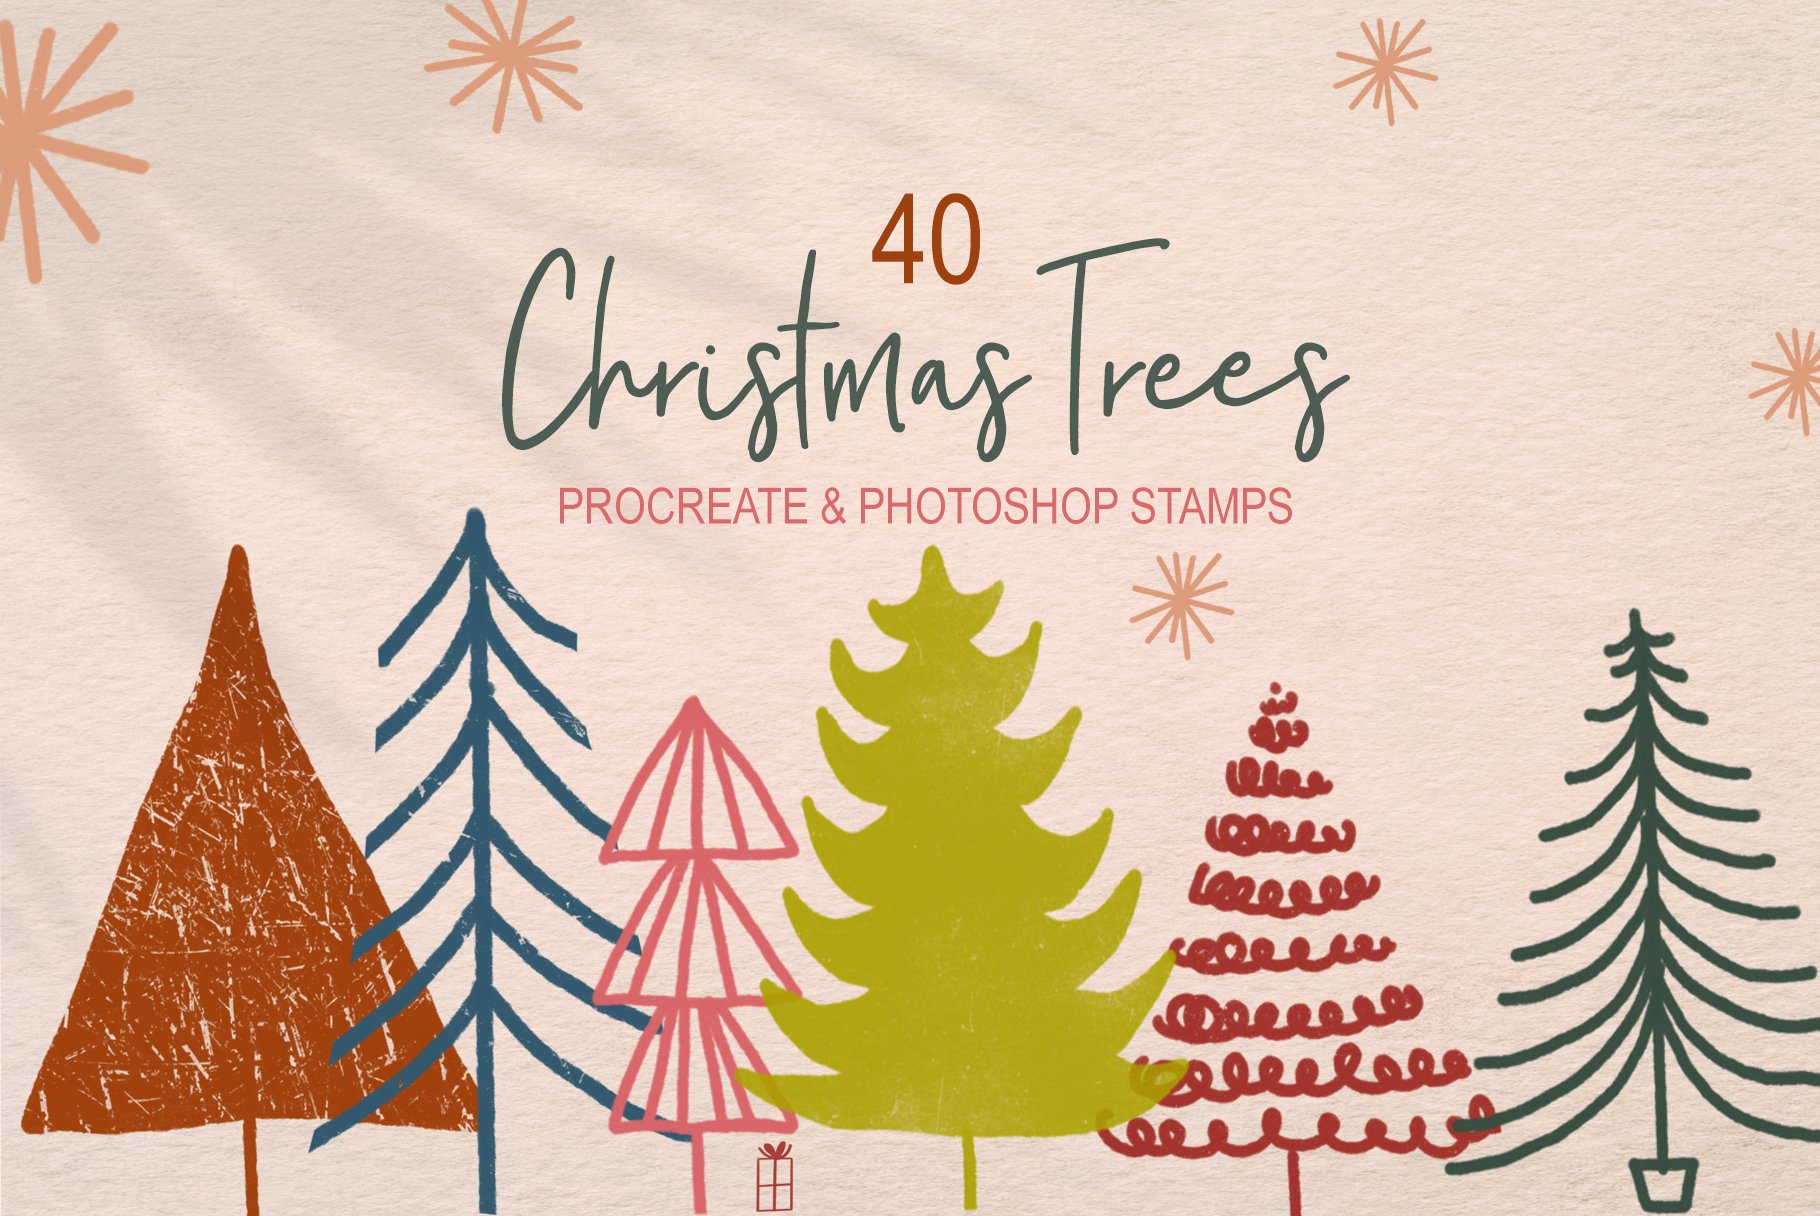 40 Christmas Tree Stampscover image.